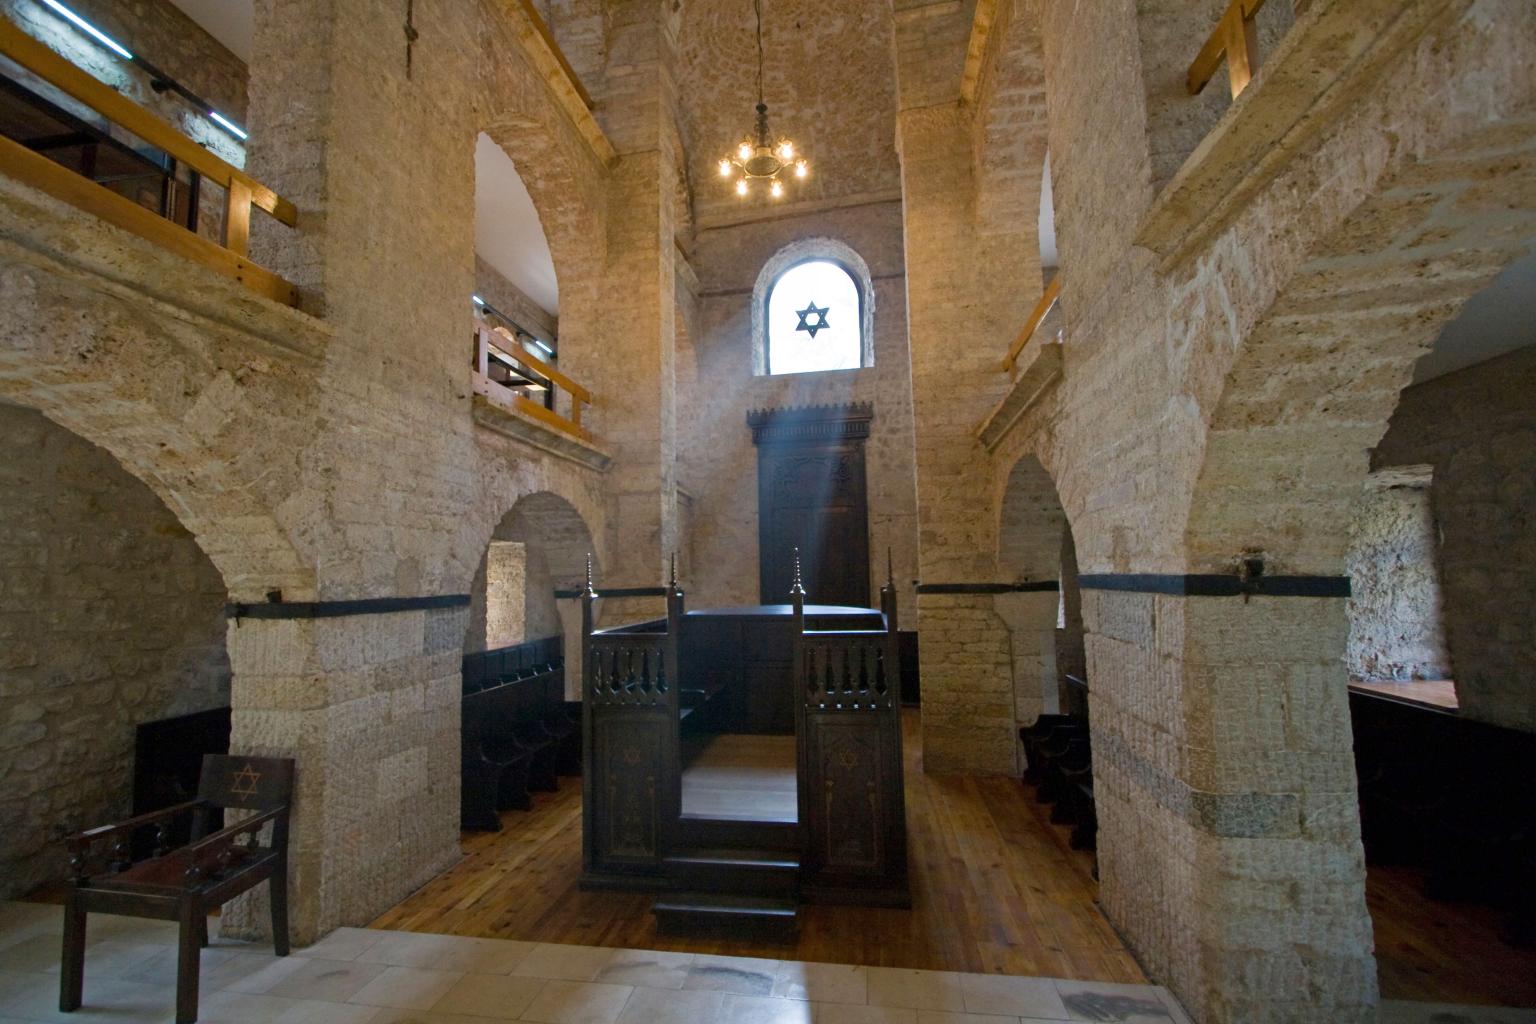 Photograph of room with arched stone doorways and central wooden platform. 